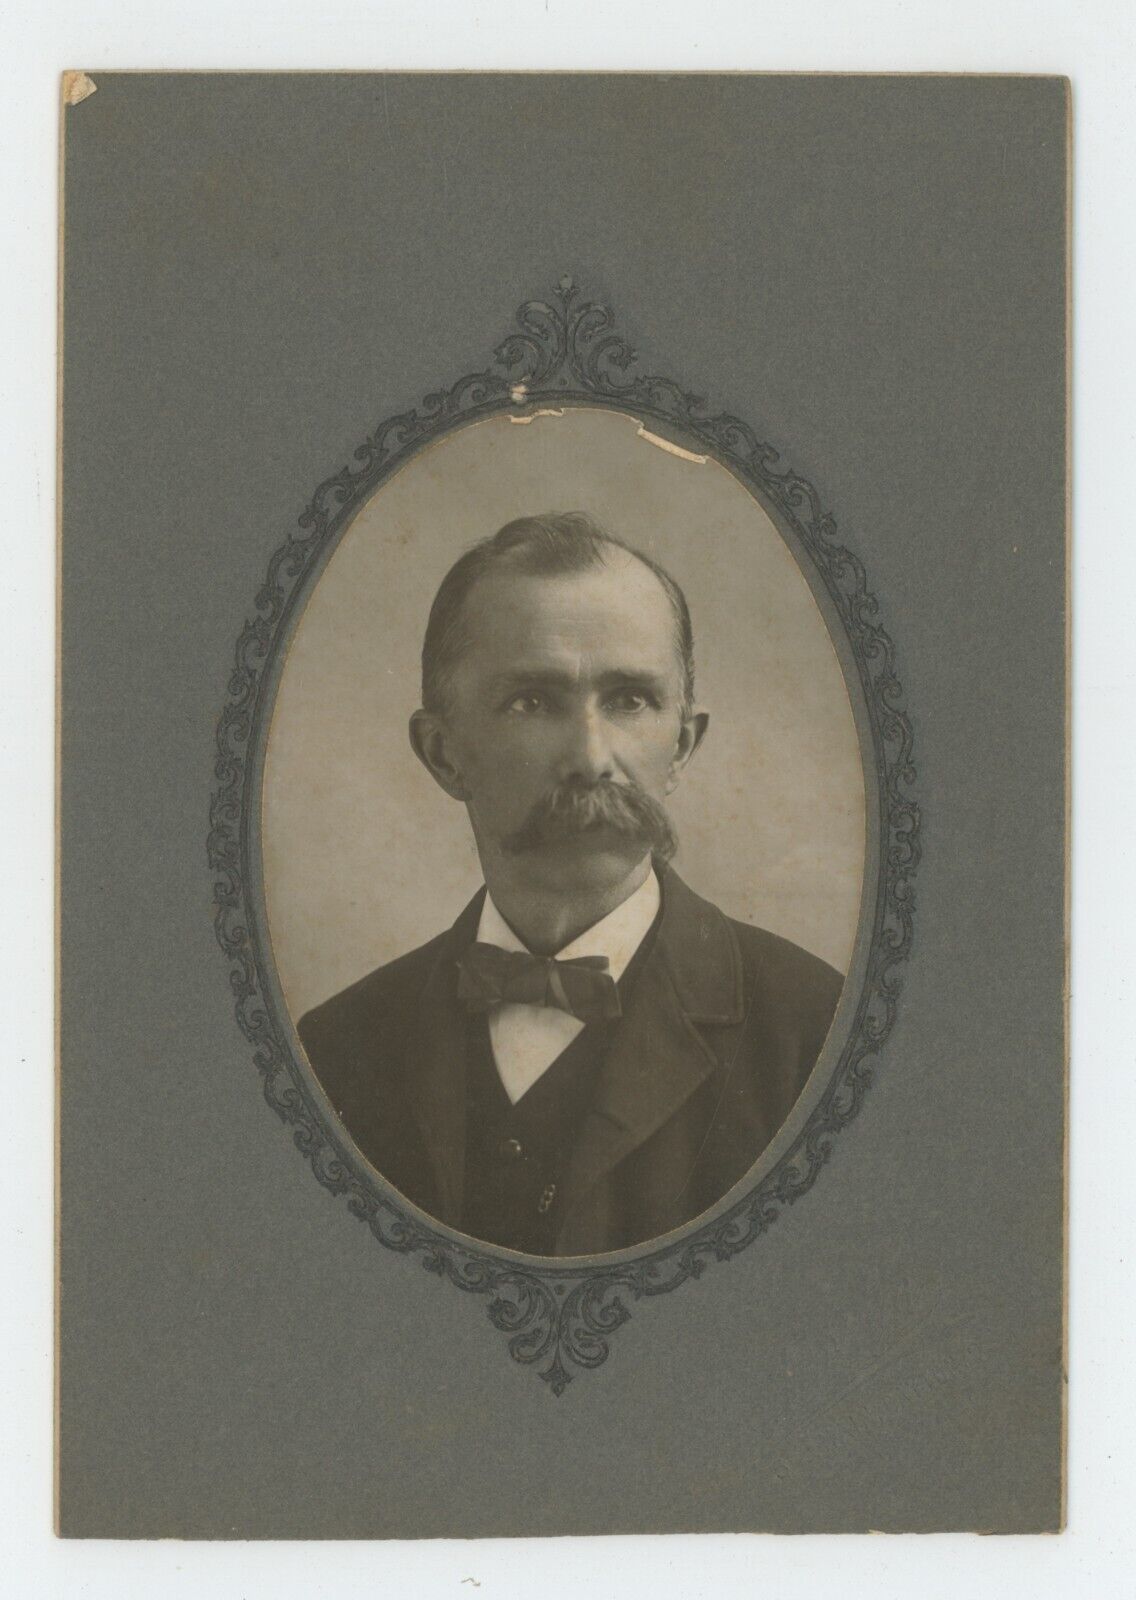 Antique c1900s Cabinet Card Older Man With Large Mustache Wearing Suit Dayton OH